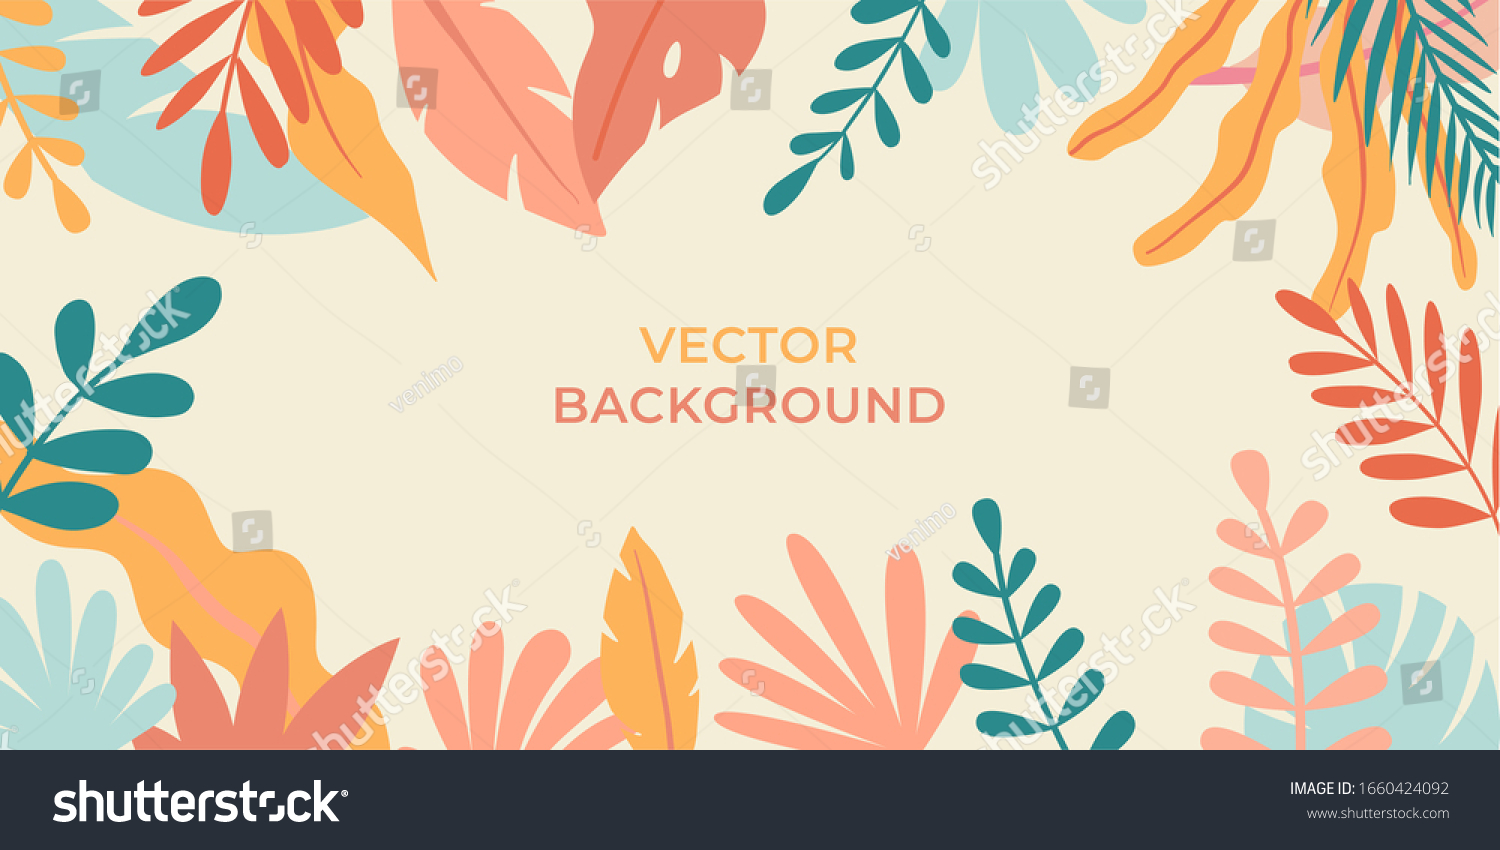 Vector illustration in simple flat style with copy space for text - background with plants and leaves - backdrop for greeting cards, posters, banners and placards #1660424092